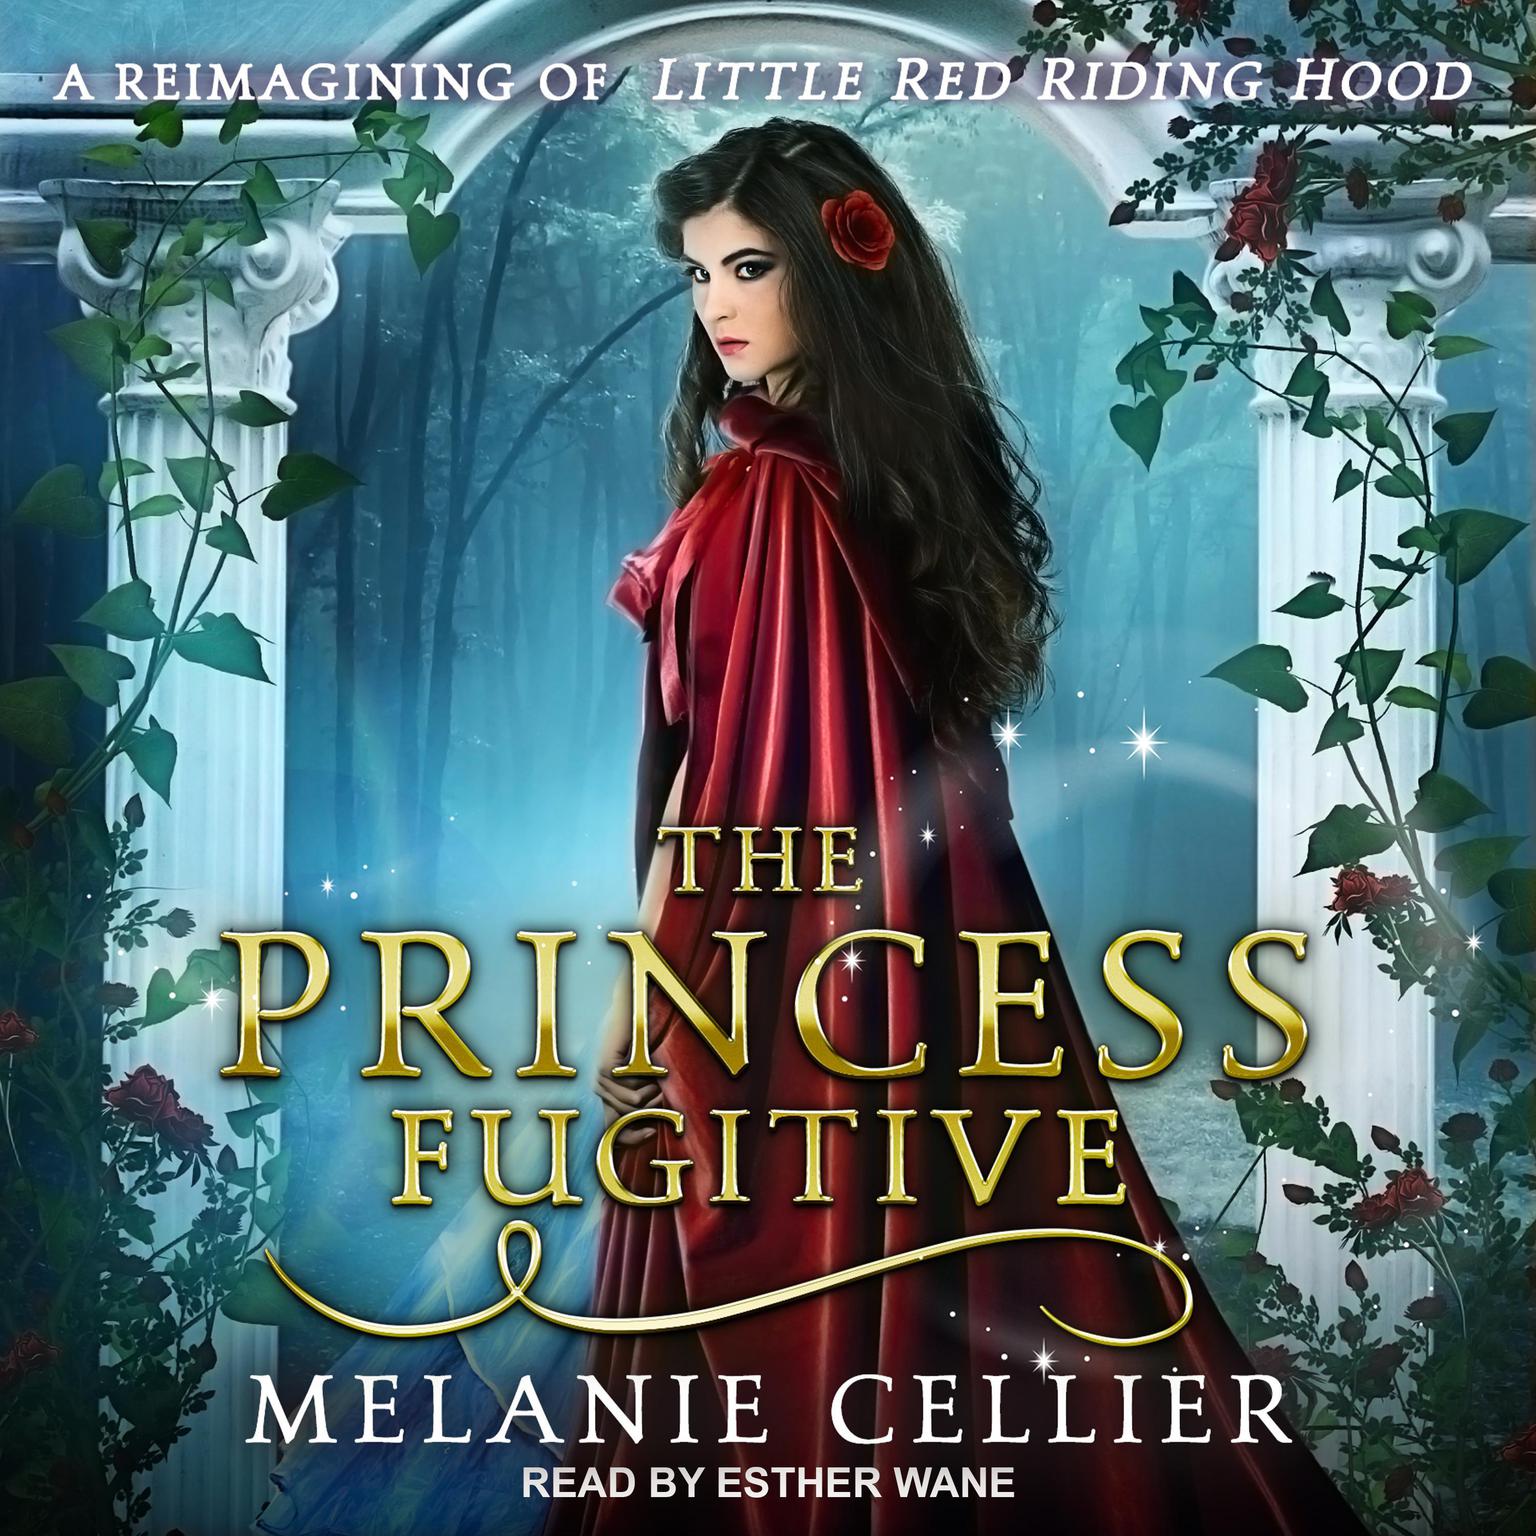 The Princess Fugitive: A Reimagining of Little Red Riding Hood Audiobook, by Melanie Cellier